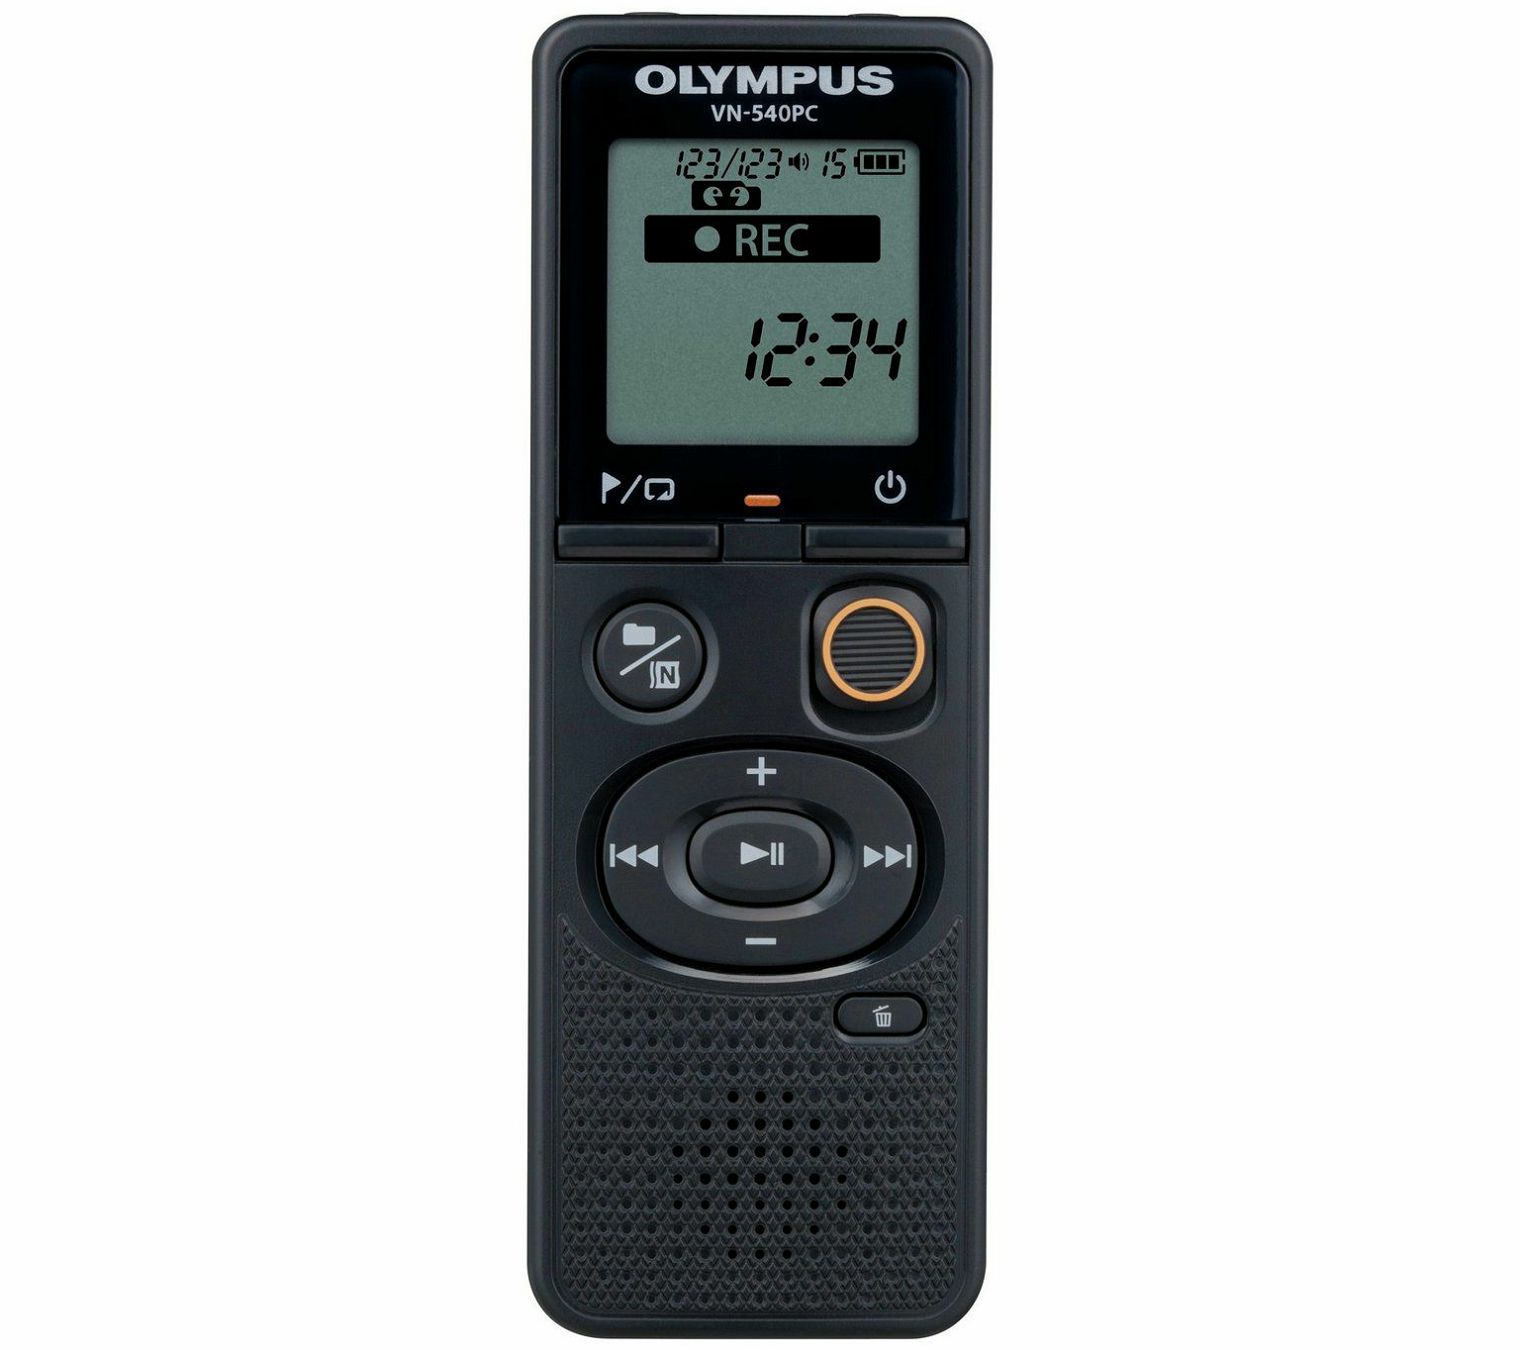 Olympus VN-540PC black (4GB) with Alkaline Battery, microUSB cable Digital Note Taker with PC Connection prijenosni snimač zvuka (V405291BE000)